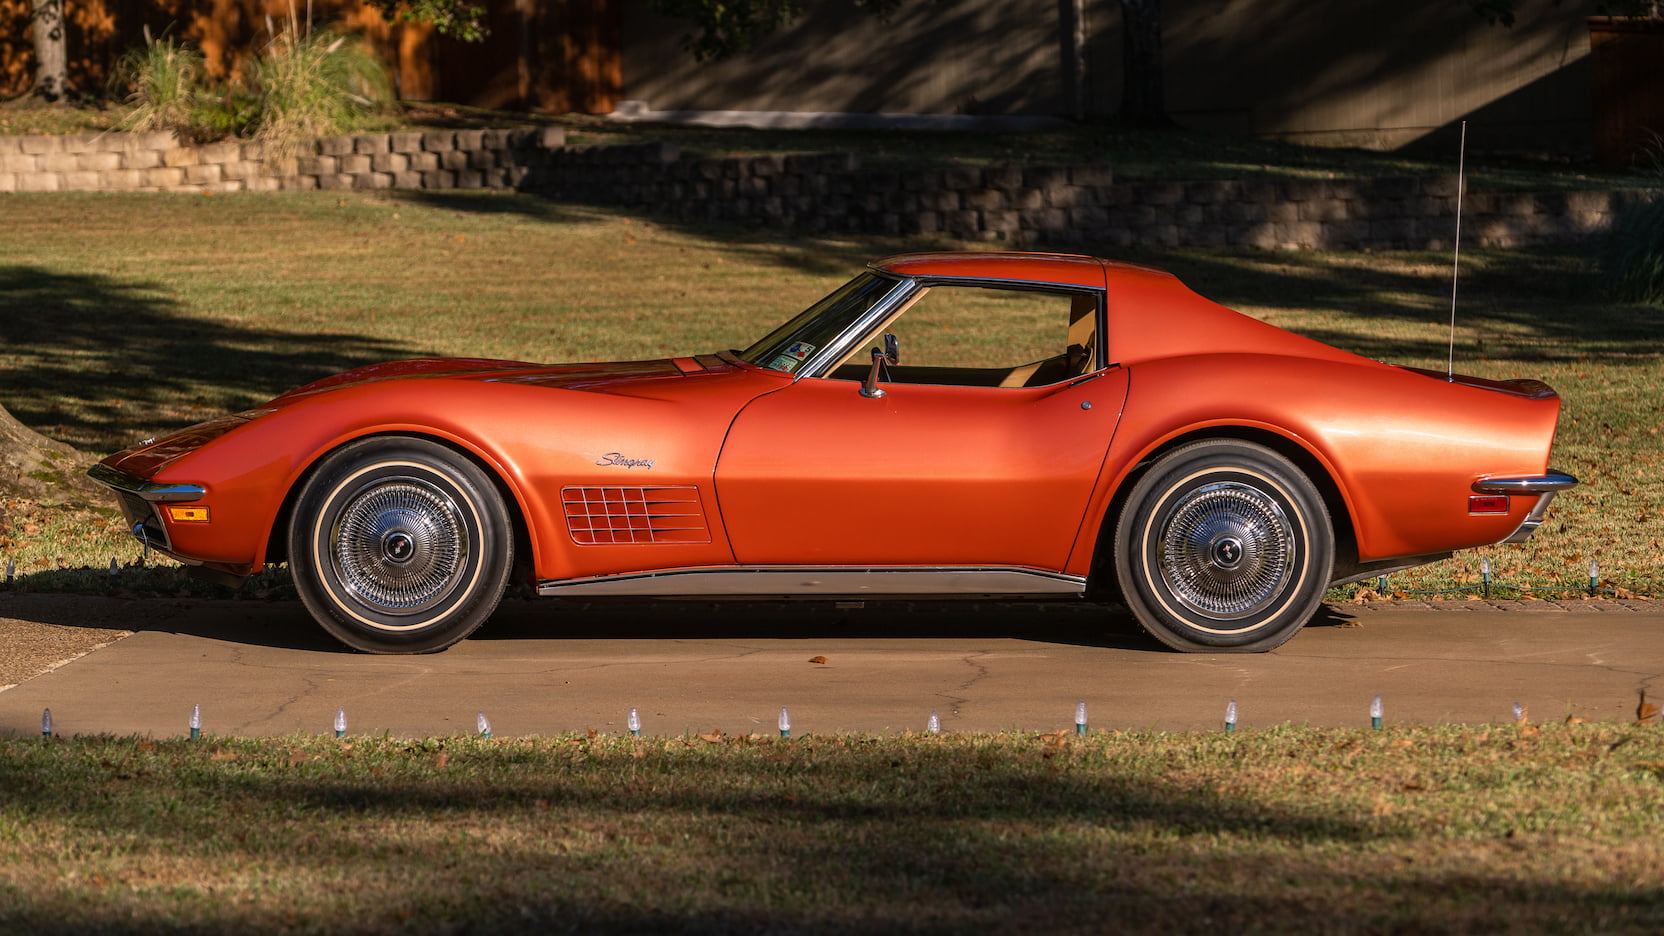 The fender louvers changed on the 1970 Corvette